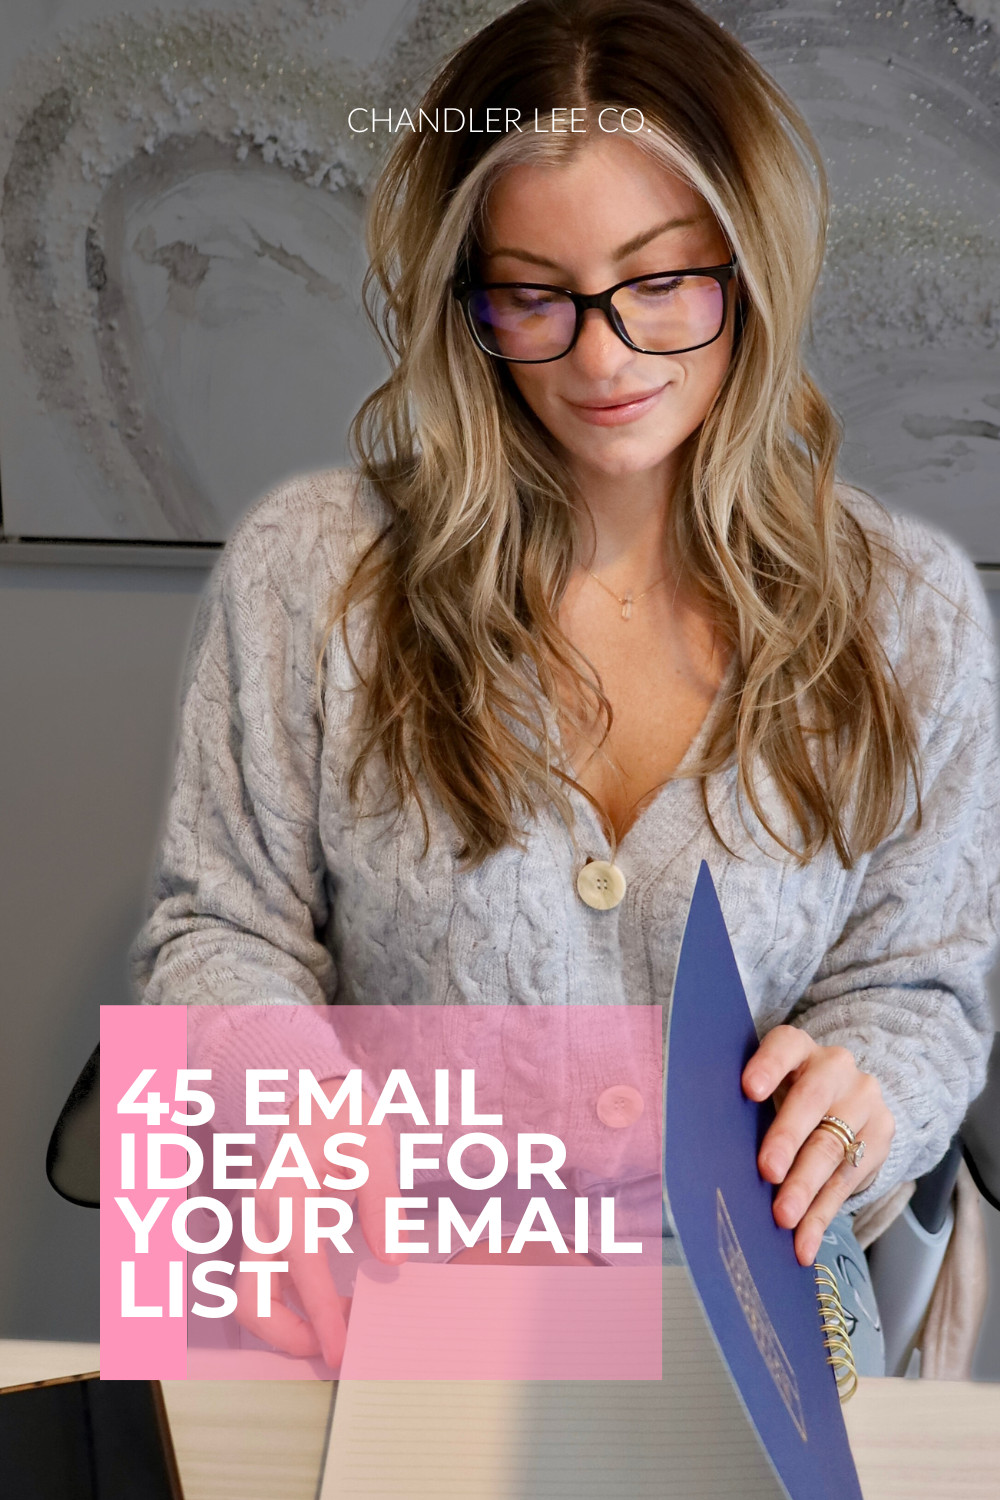 45 Email Ideas for your Email List